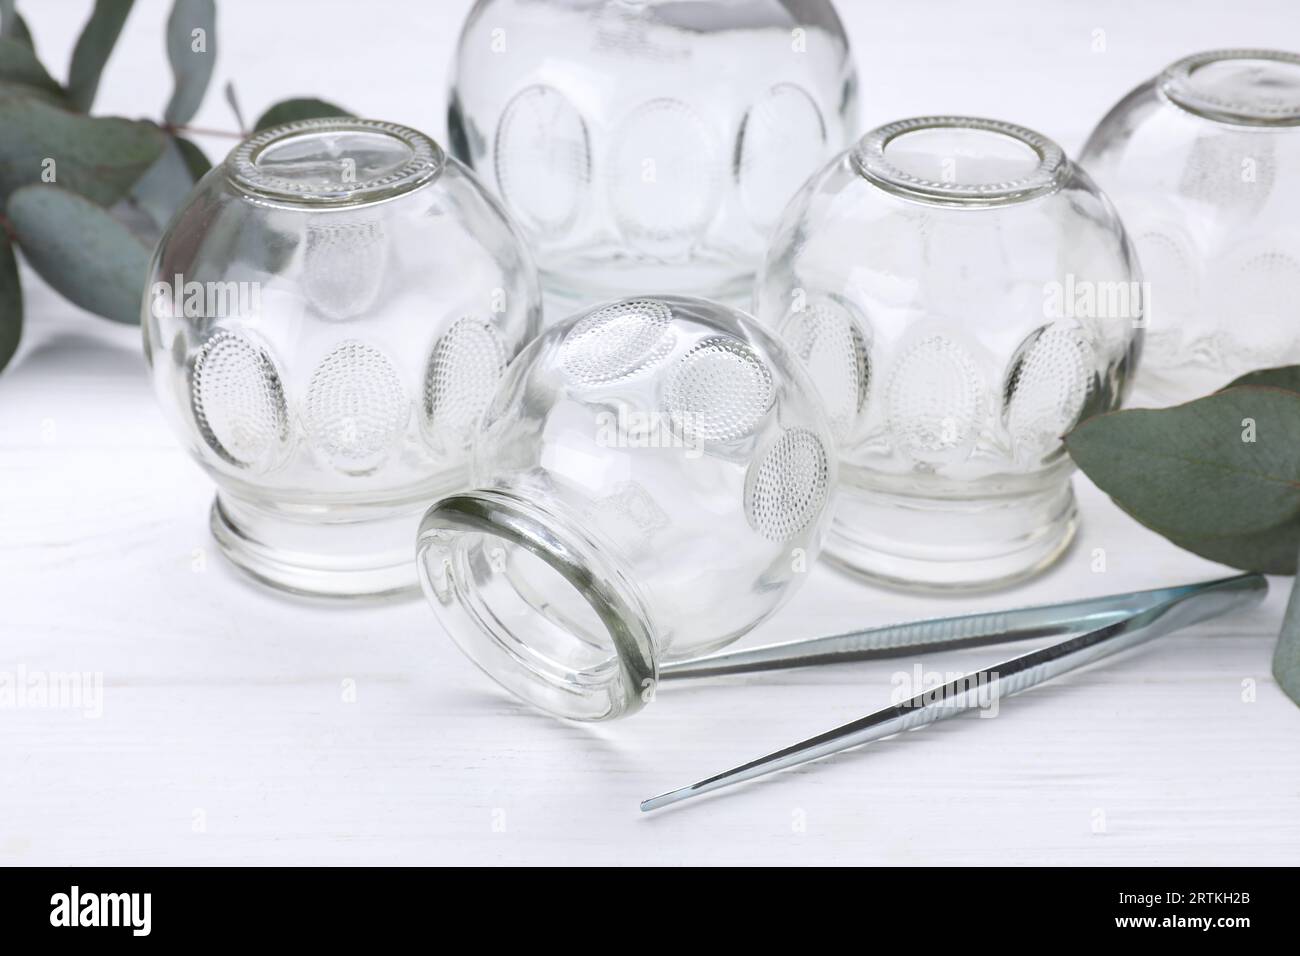 https://c8.alamy.com/comp/2RTKH2B/glass-cups-tweezers-and-eucalyptus-leaves-on-white-wooden-table-closeup-cupping-therapy-2RTKH2B.jpg